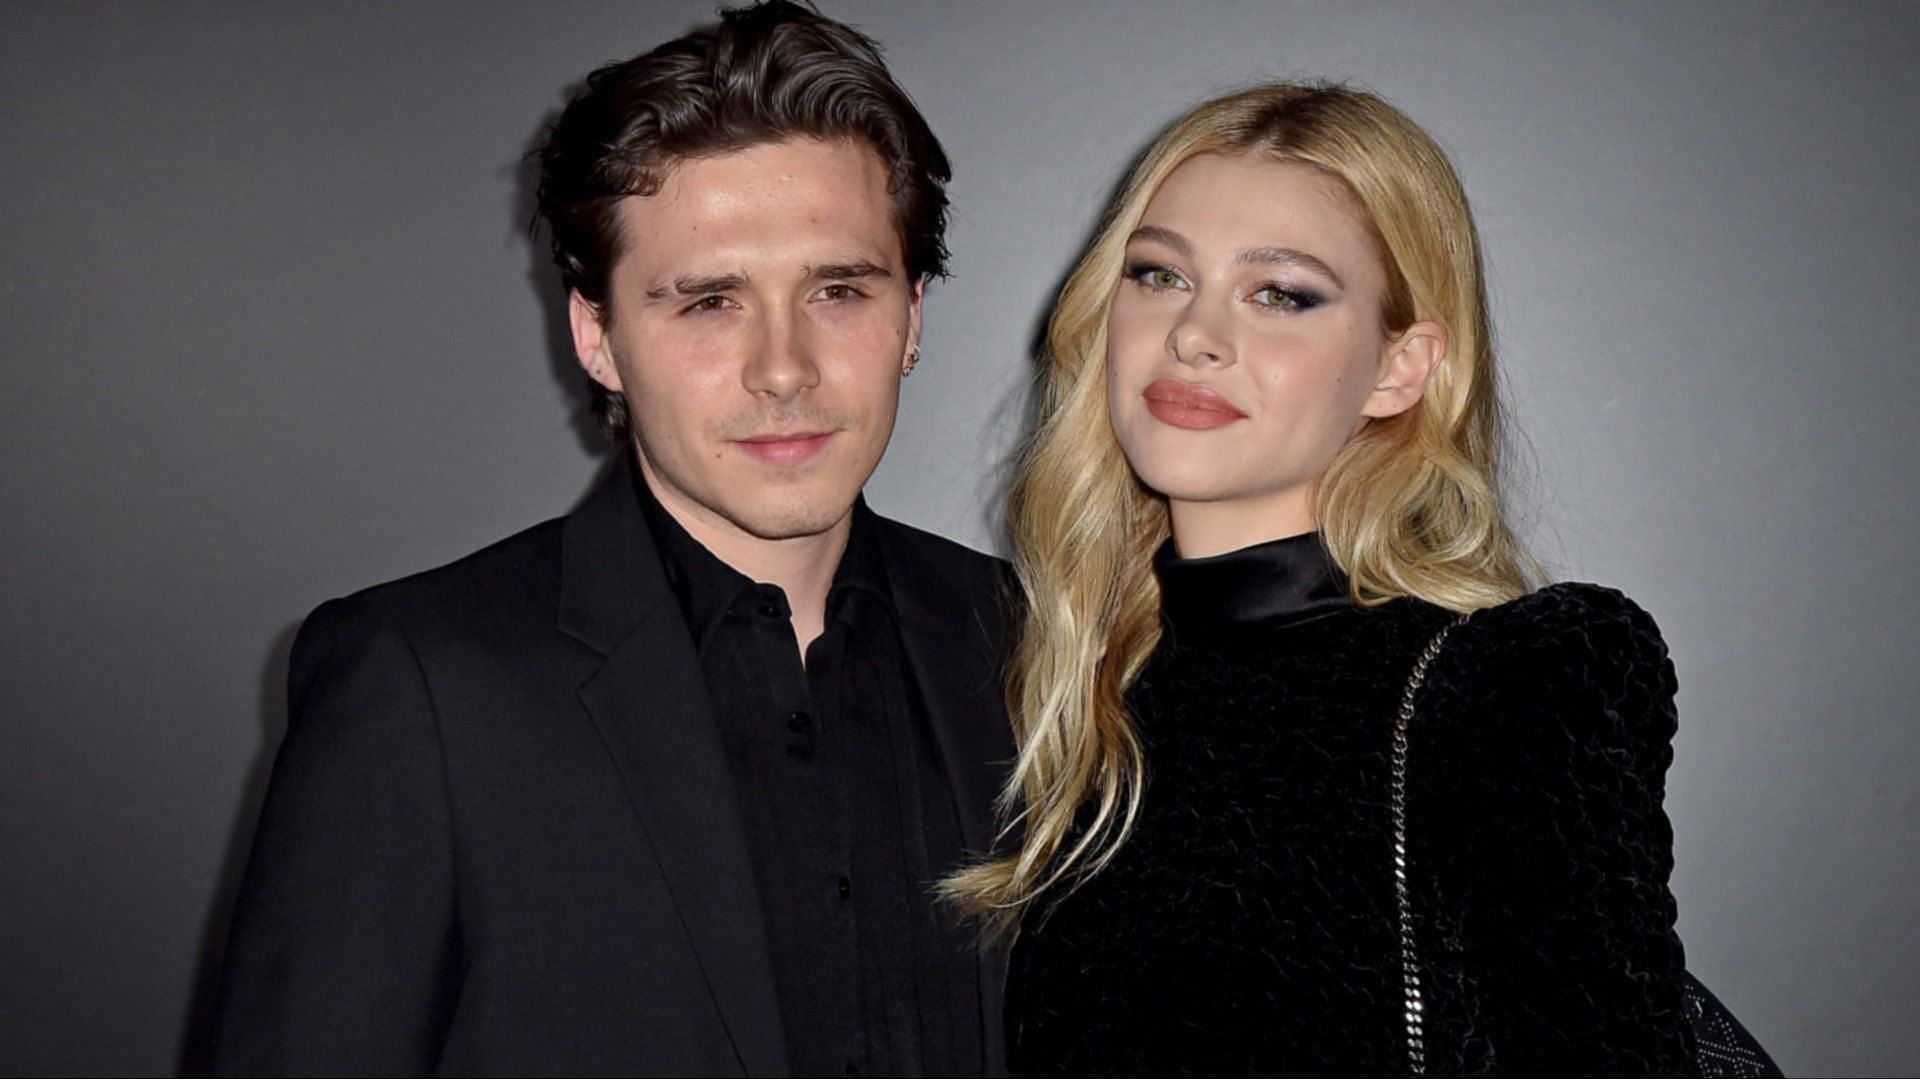 Wedding bells would soon ring for Brooklyn Beckham and Nicola Peltz (Image via WireImage)